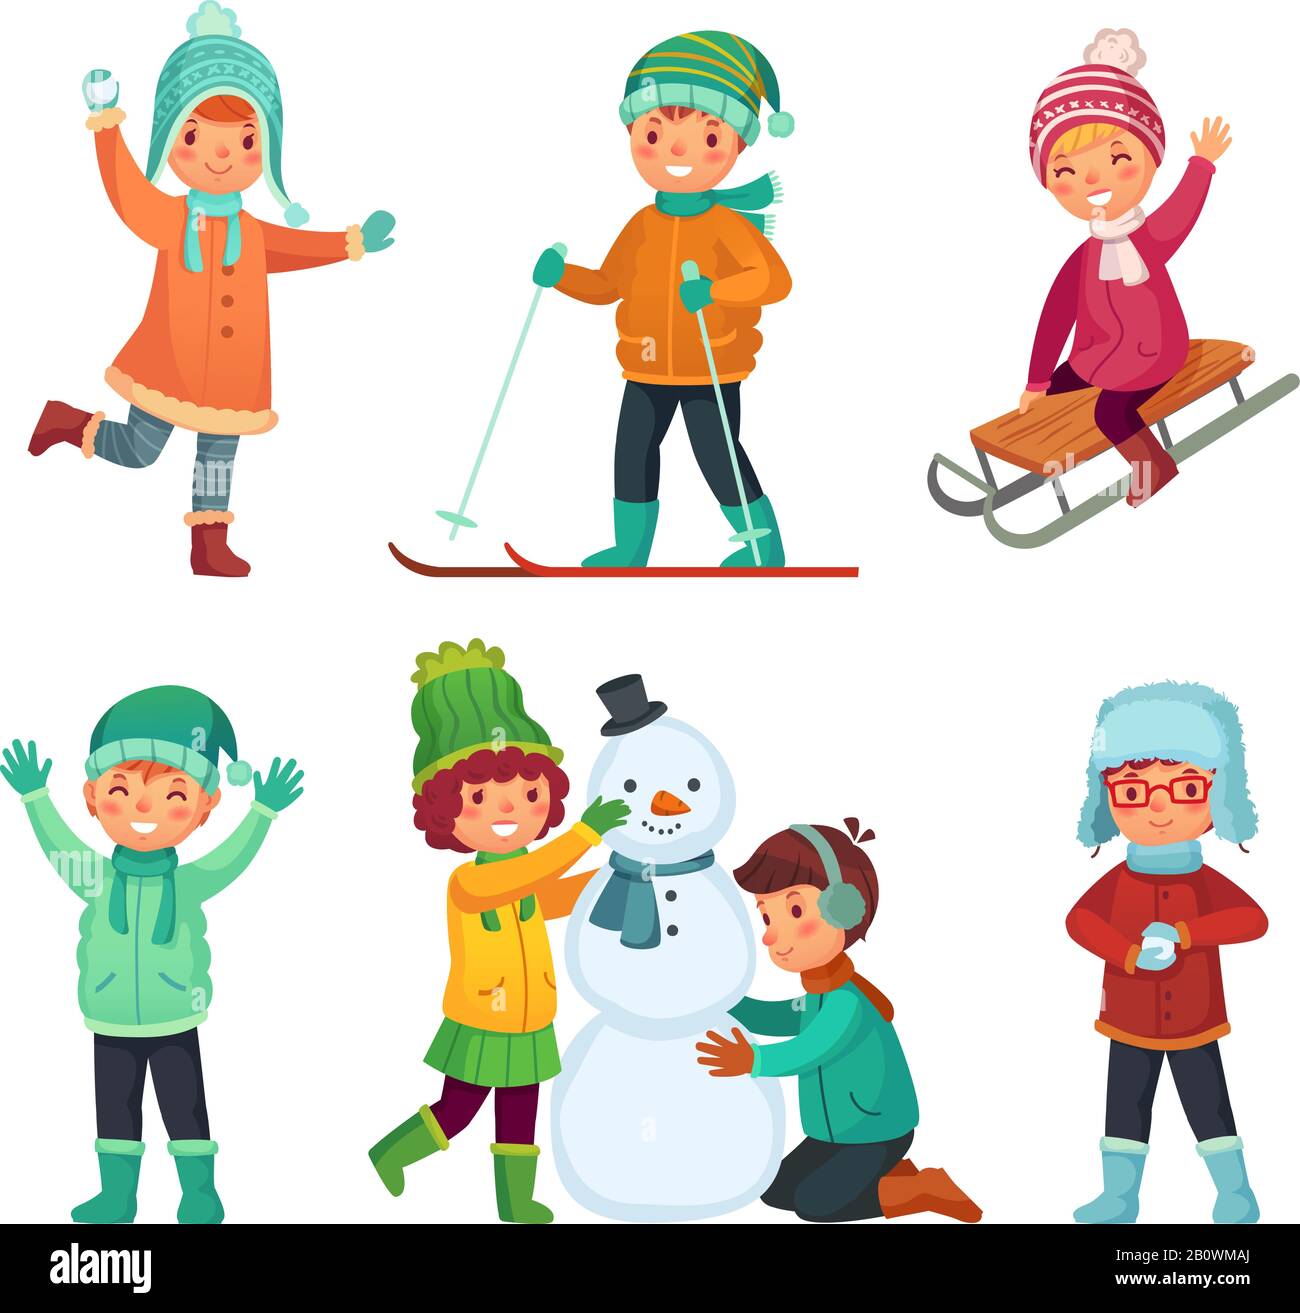 Cartoon winter kids. Children play in winters holiday, sledding and making snowman. Childrens characters vector set Stock Vector